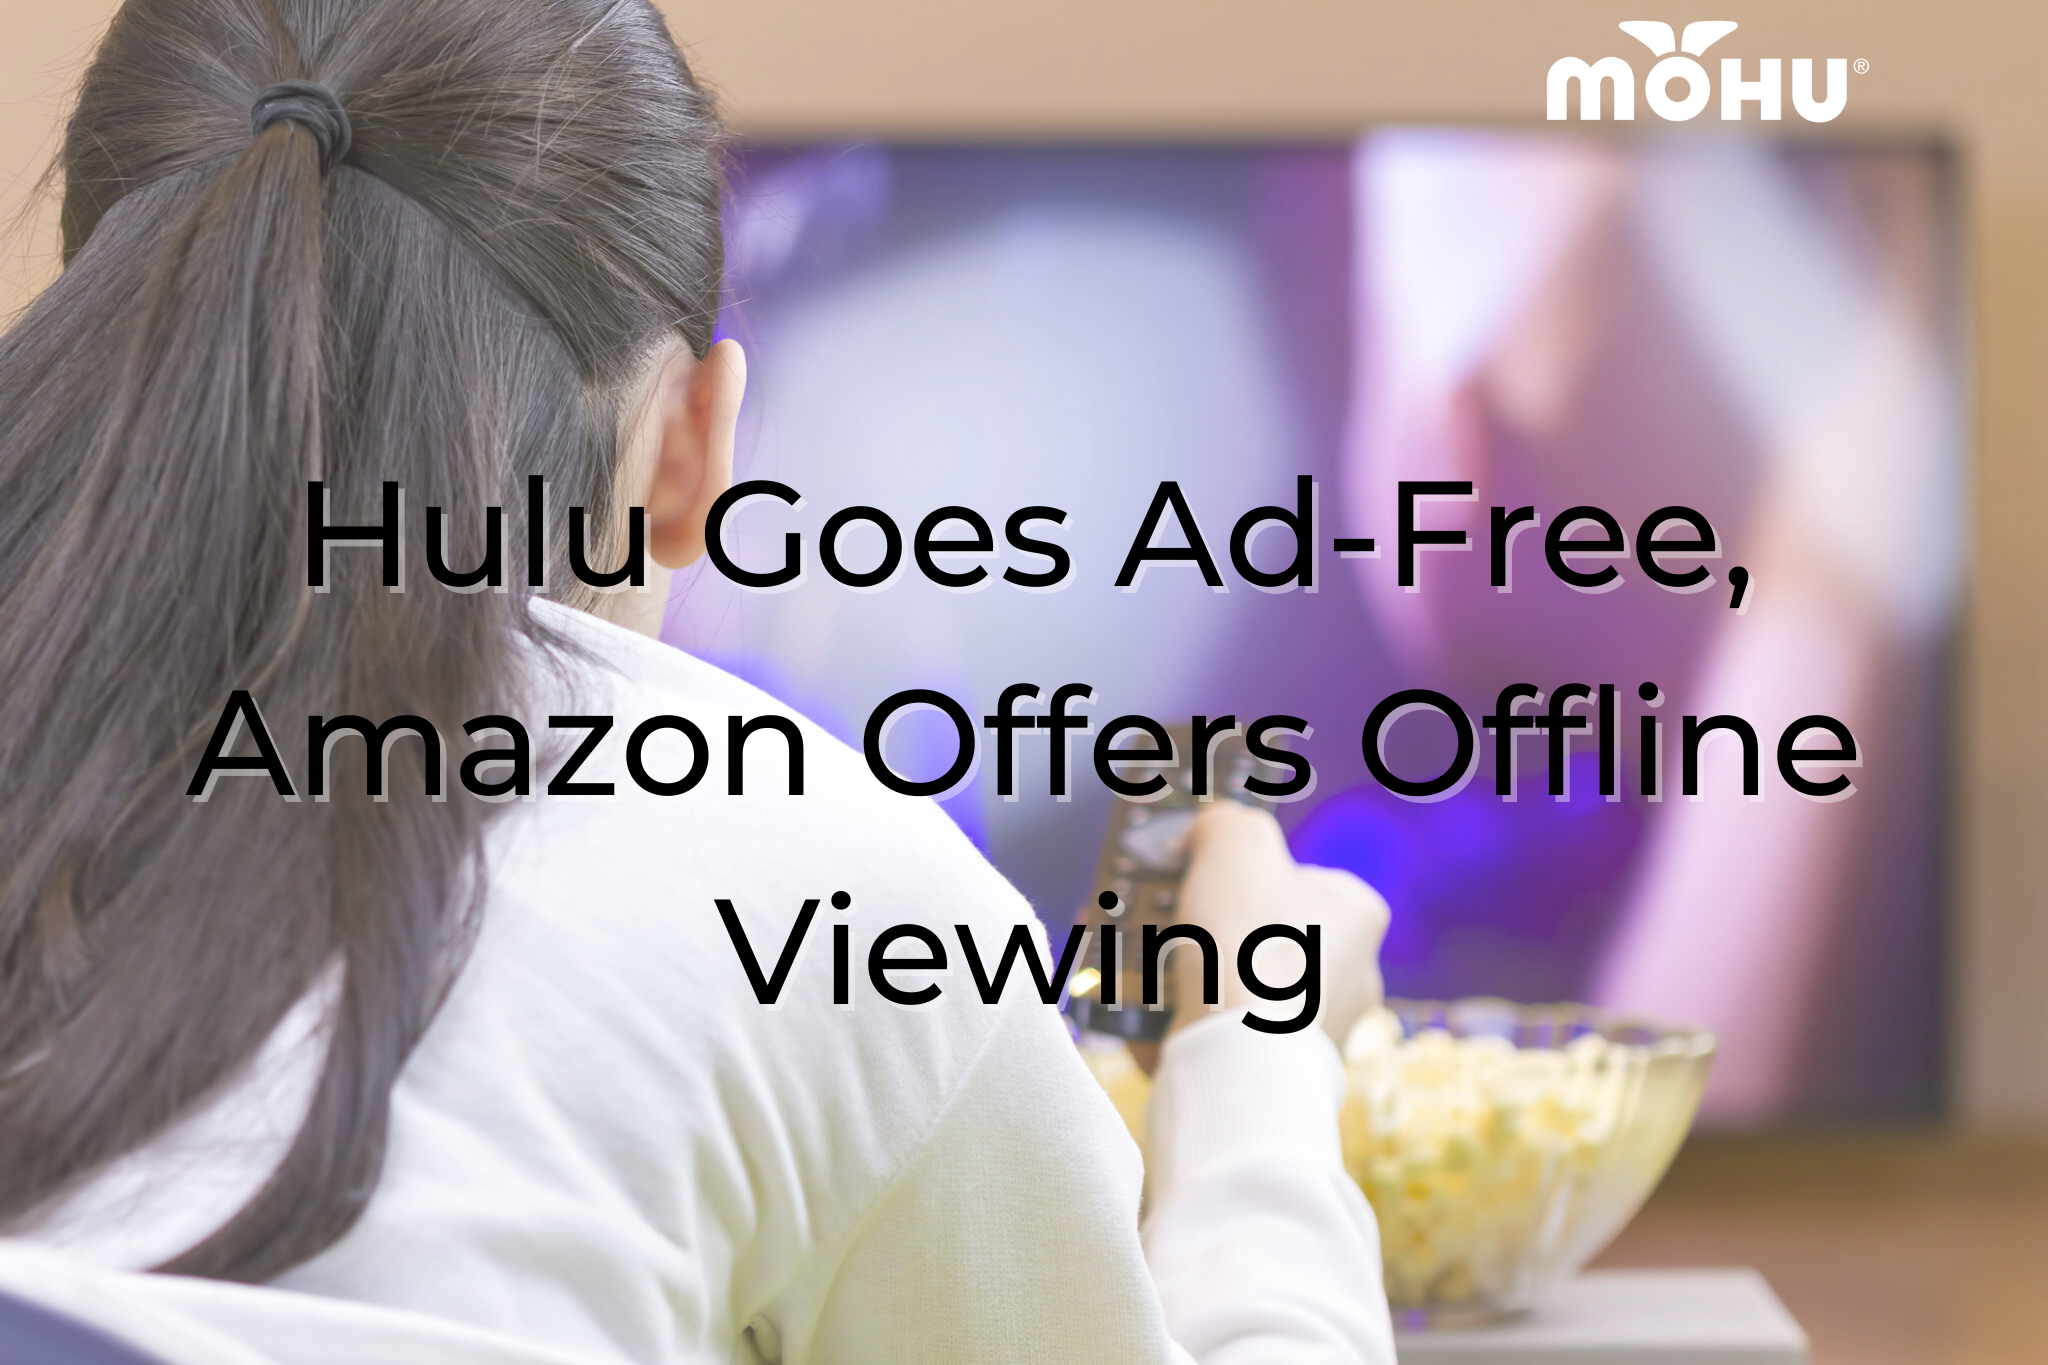 Woman laying down watching TV with a bowl of popcorn, Hulu Goes Ad-Free, Amazon Offers Offline Viewing, Mohu logo